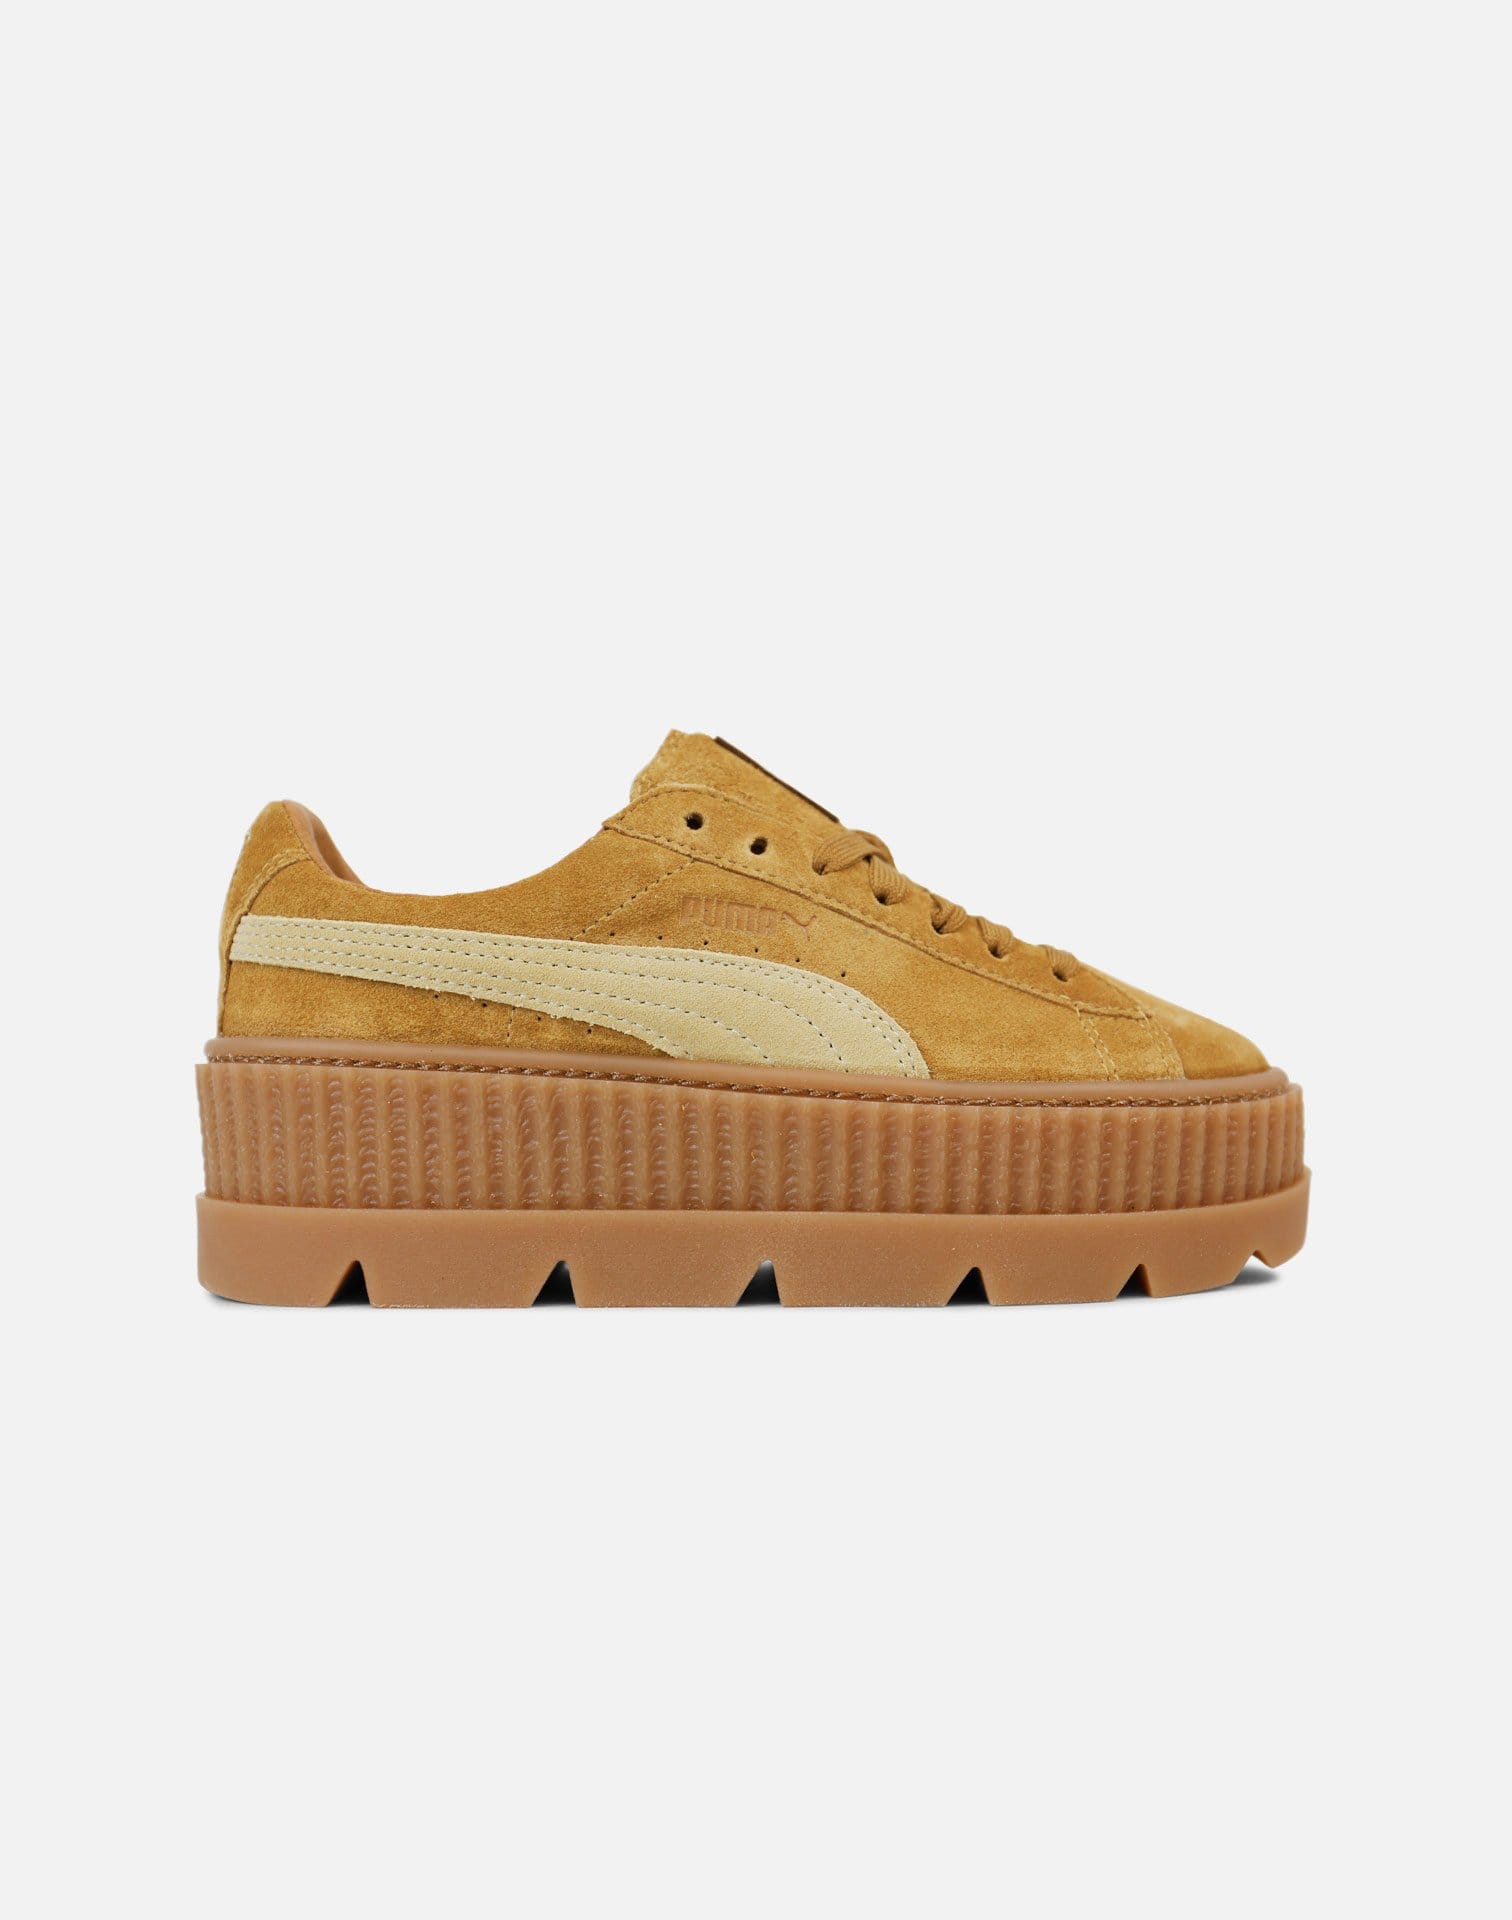 puma creepers dtlr